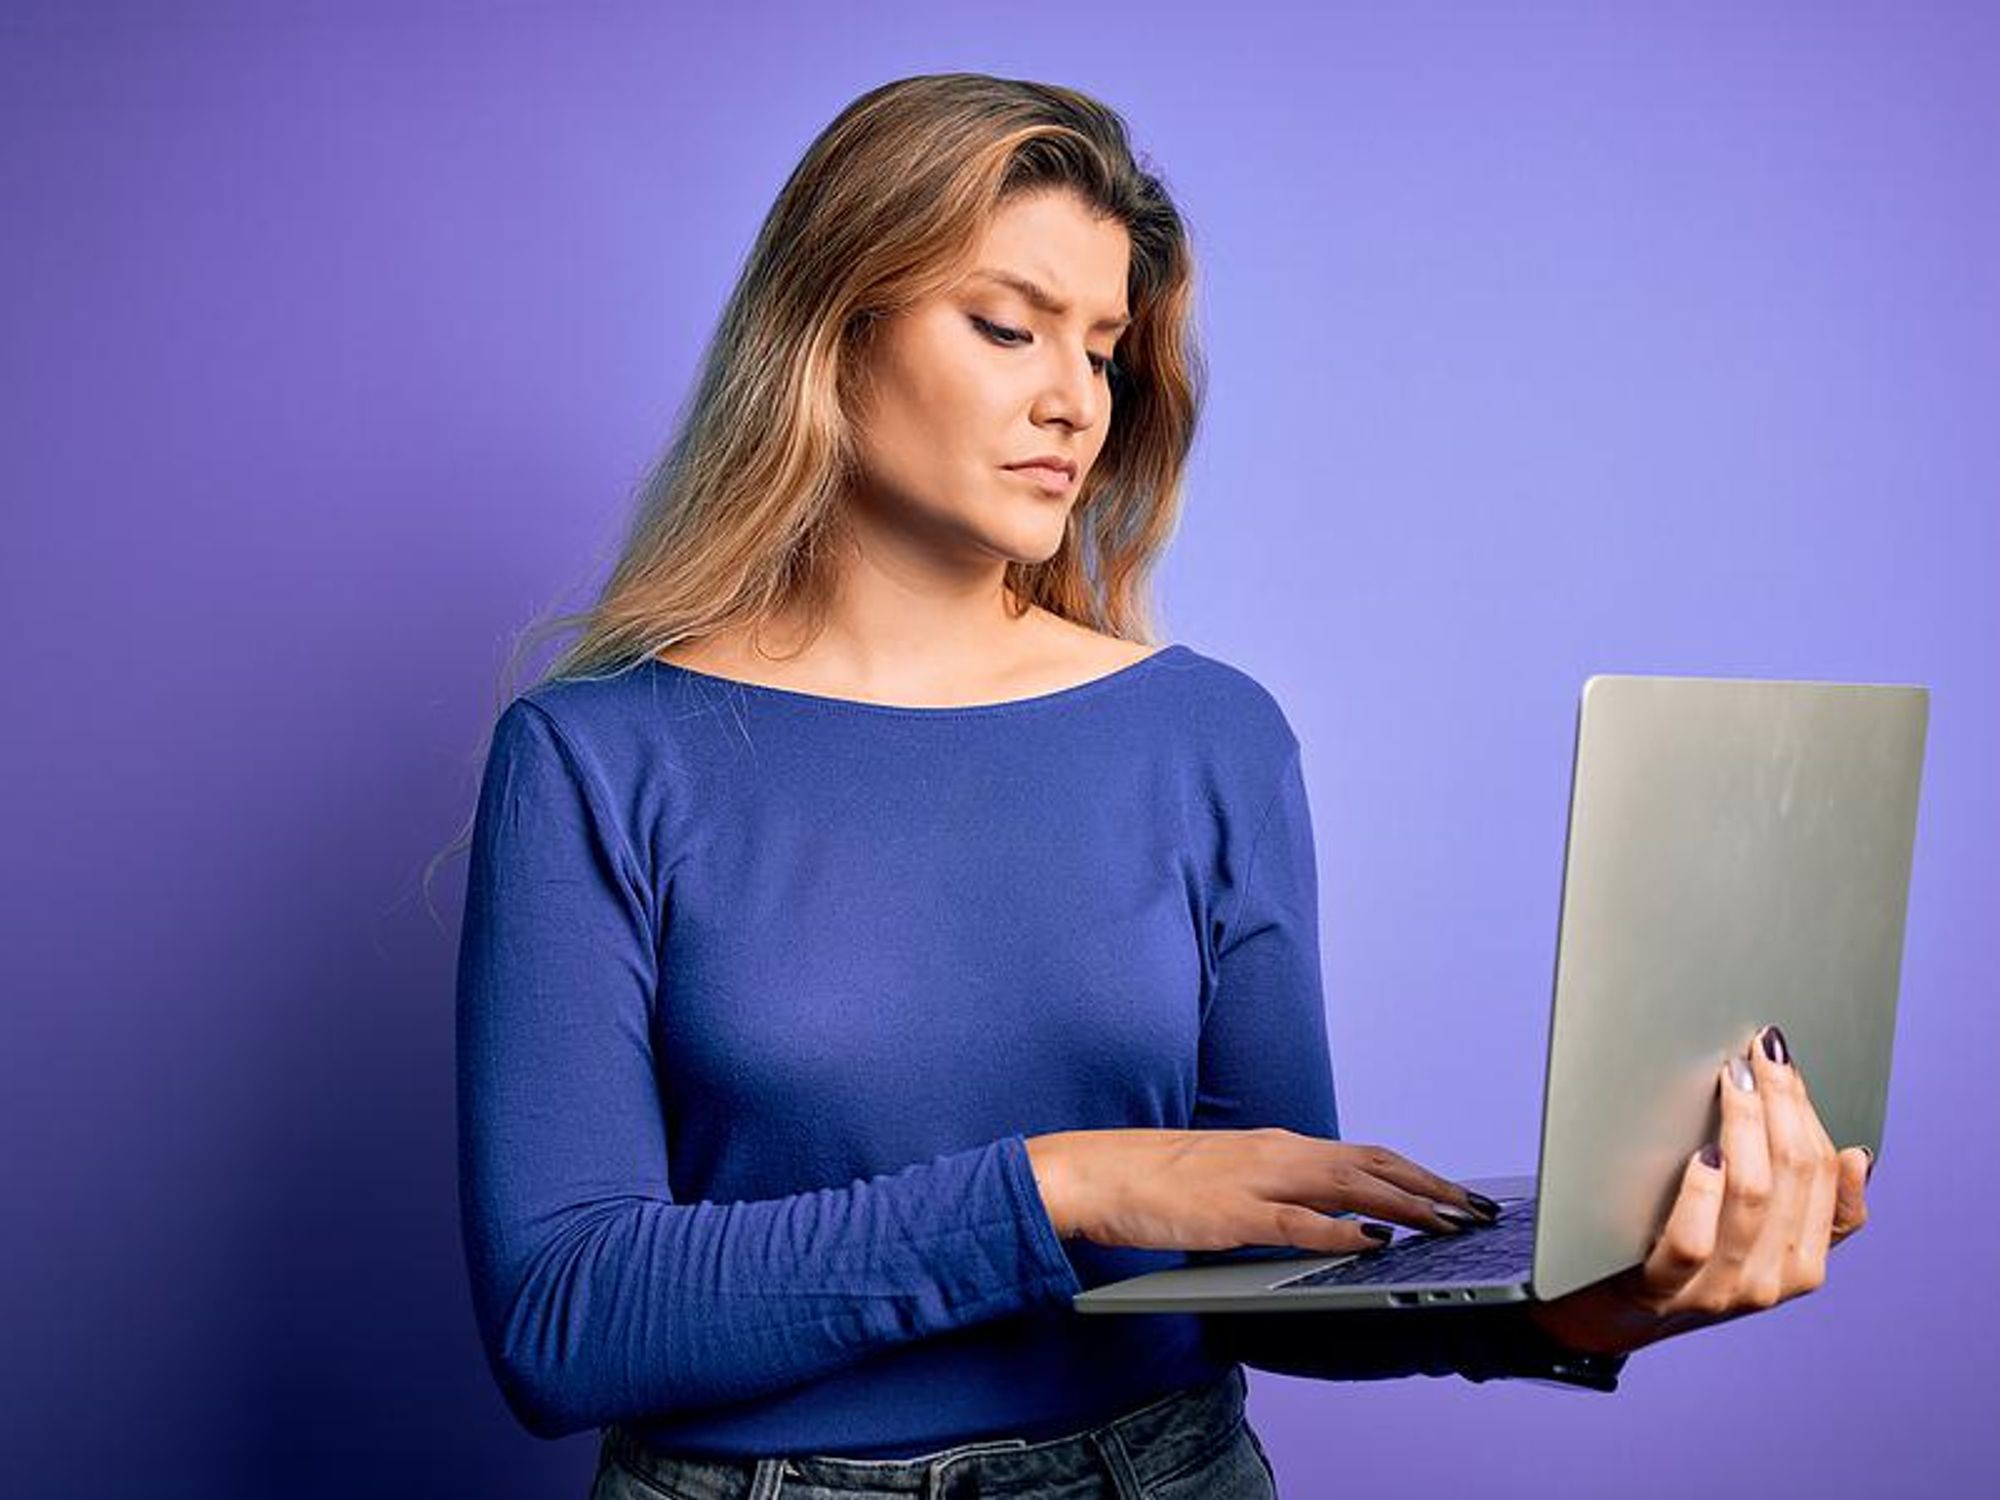 Working woman looking at laptop